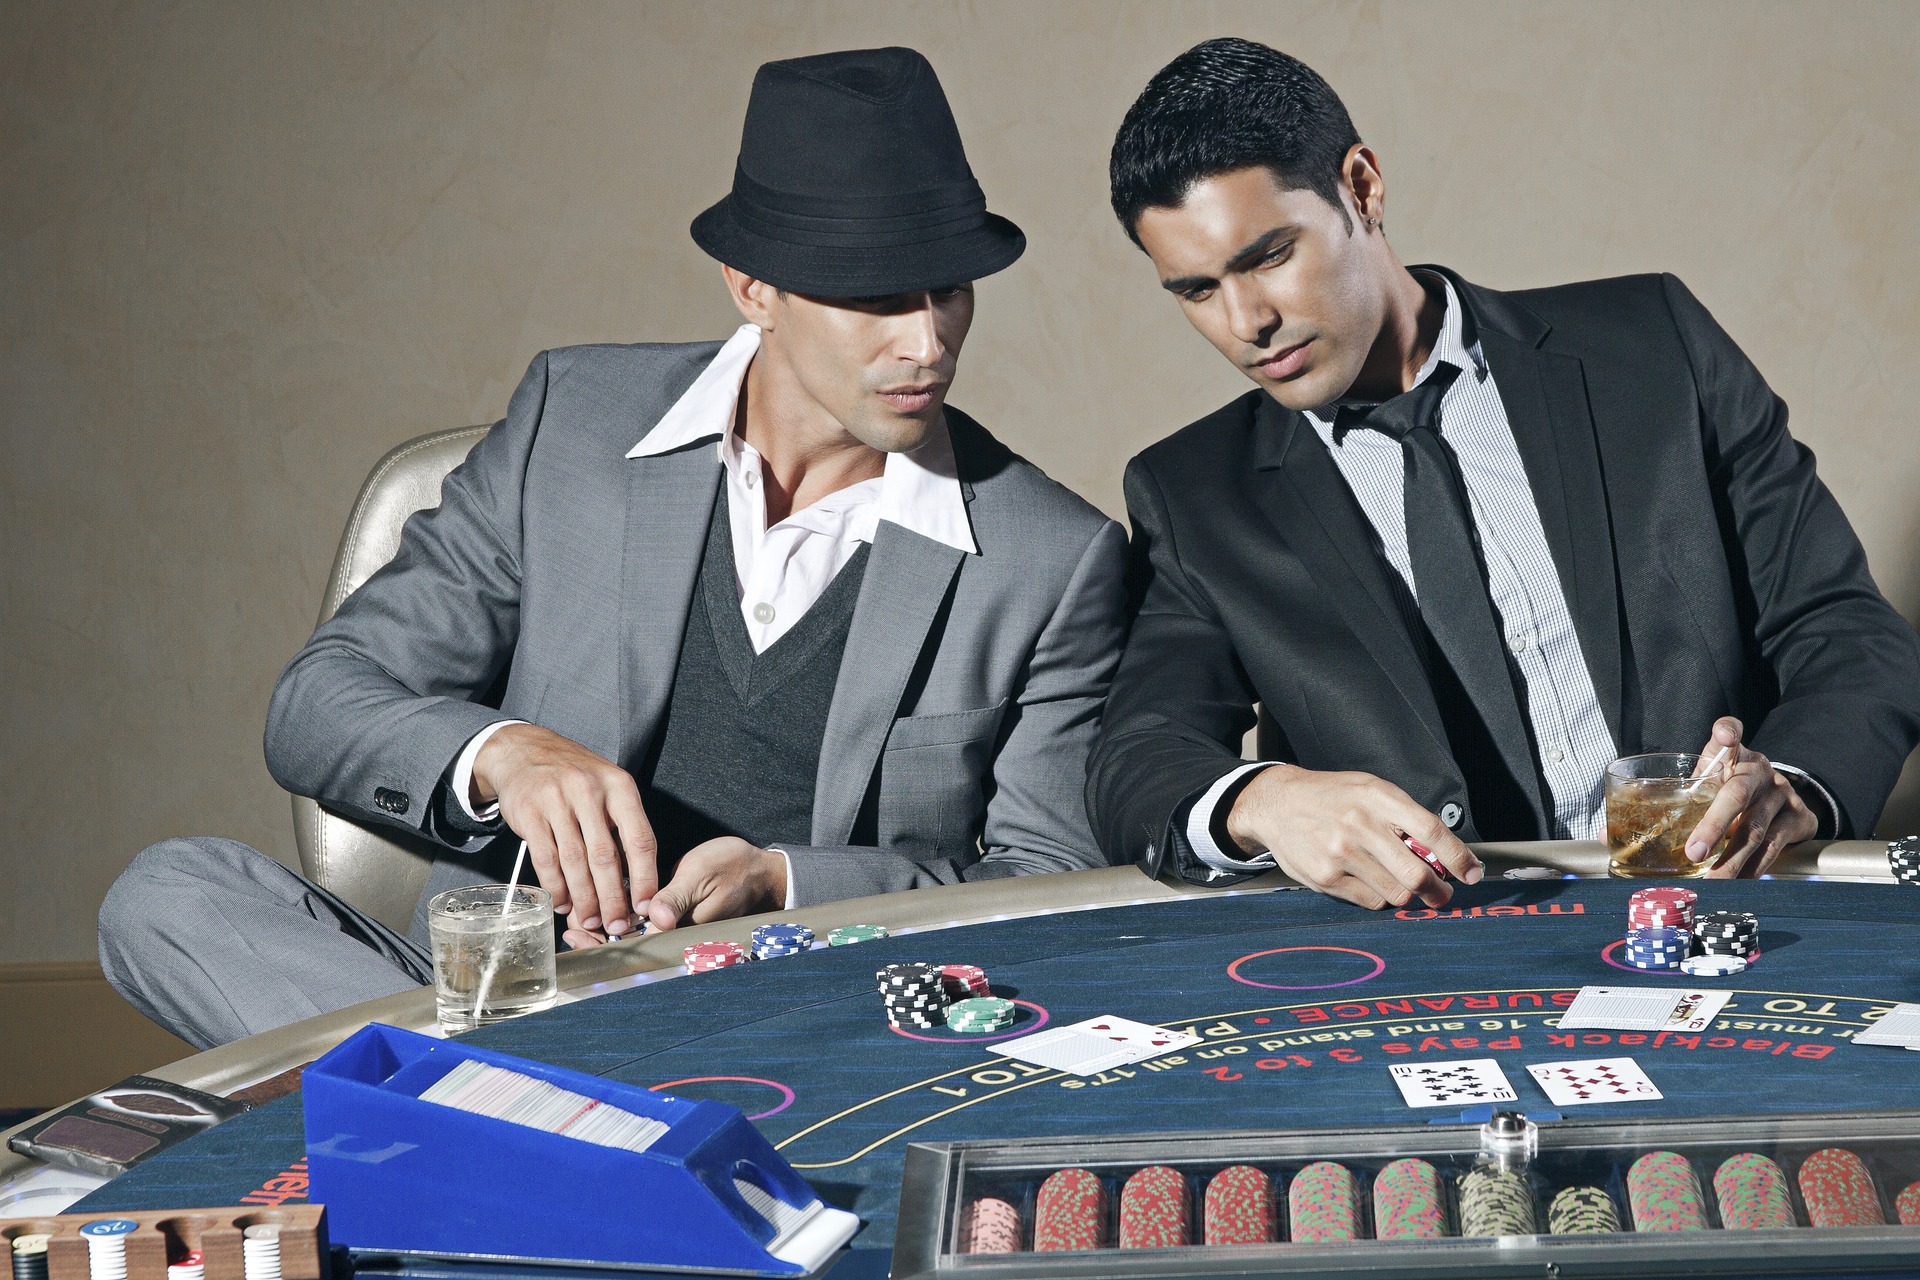 Best Casino Games For Players Looking For High Excitement And Adventure